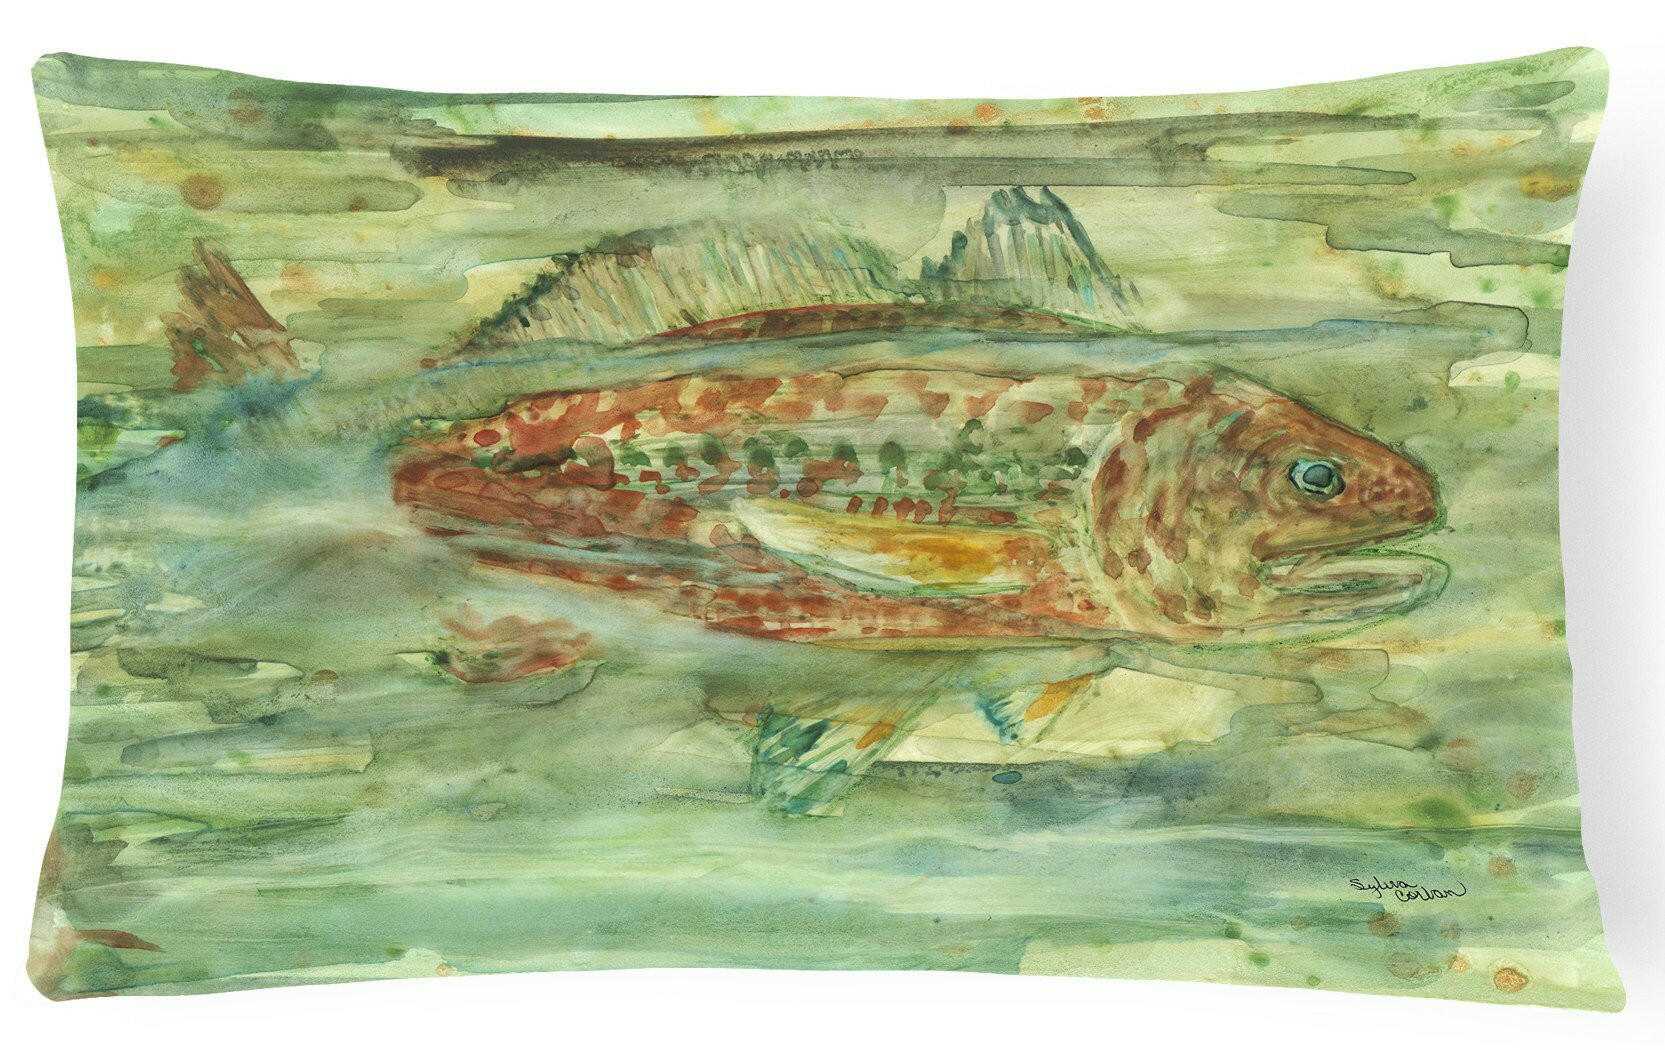 Abstract Red Fish Fabric Decorative Pillow 8960PW1216 by Caroline's Treasures